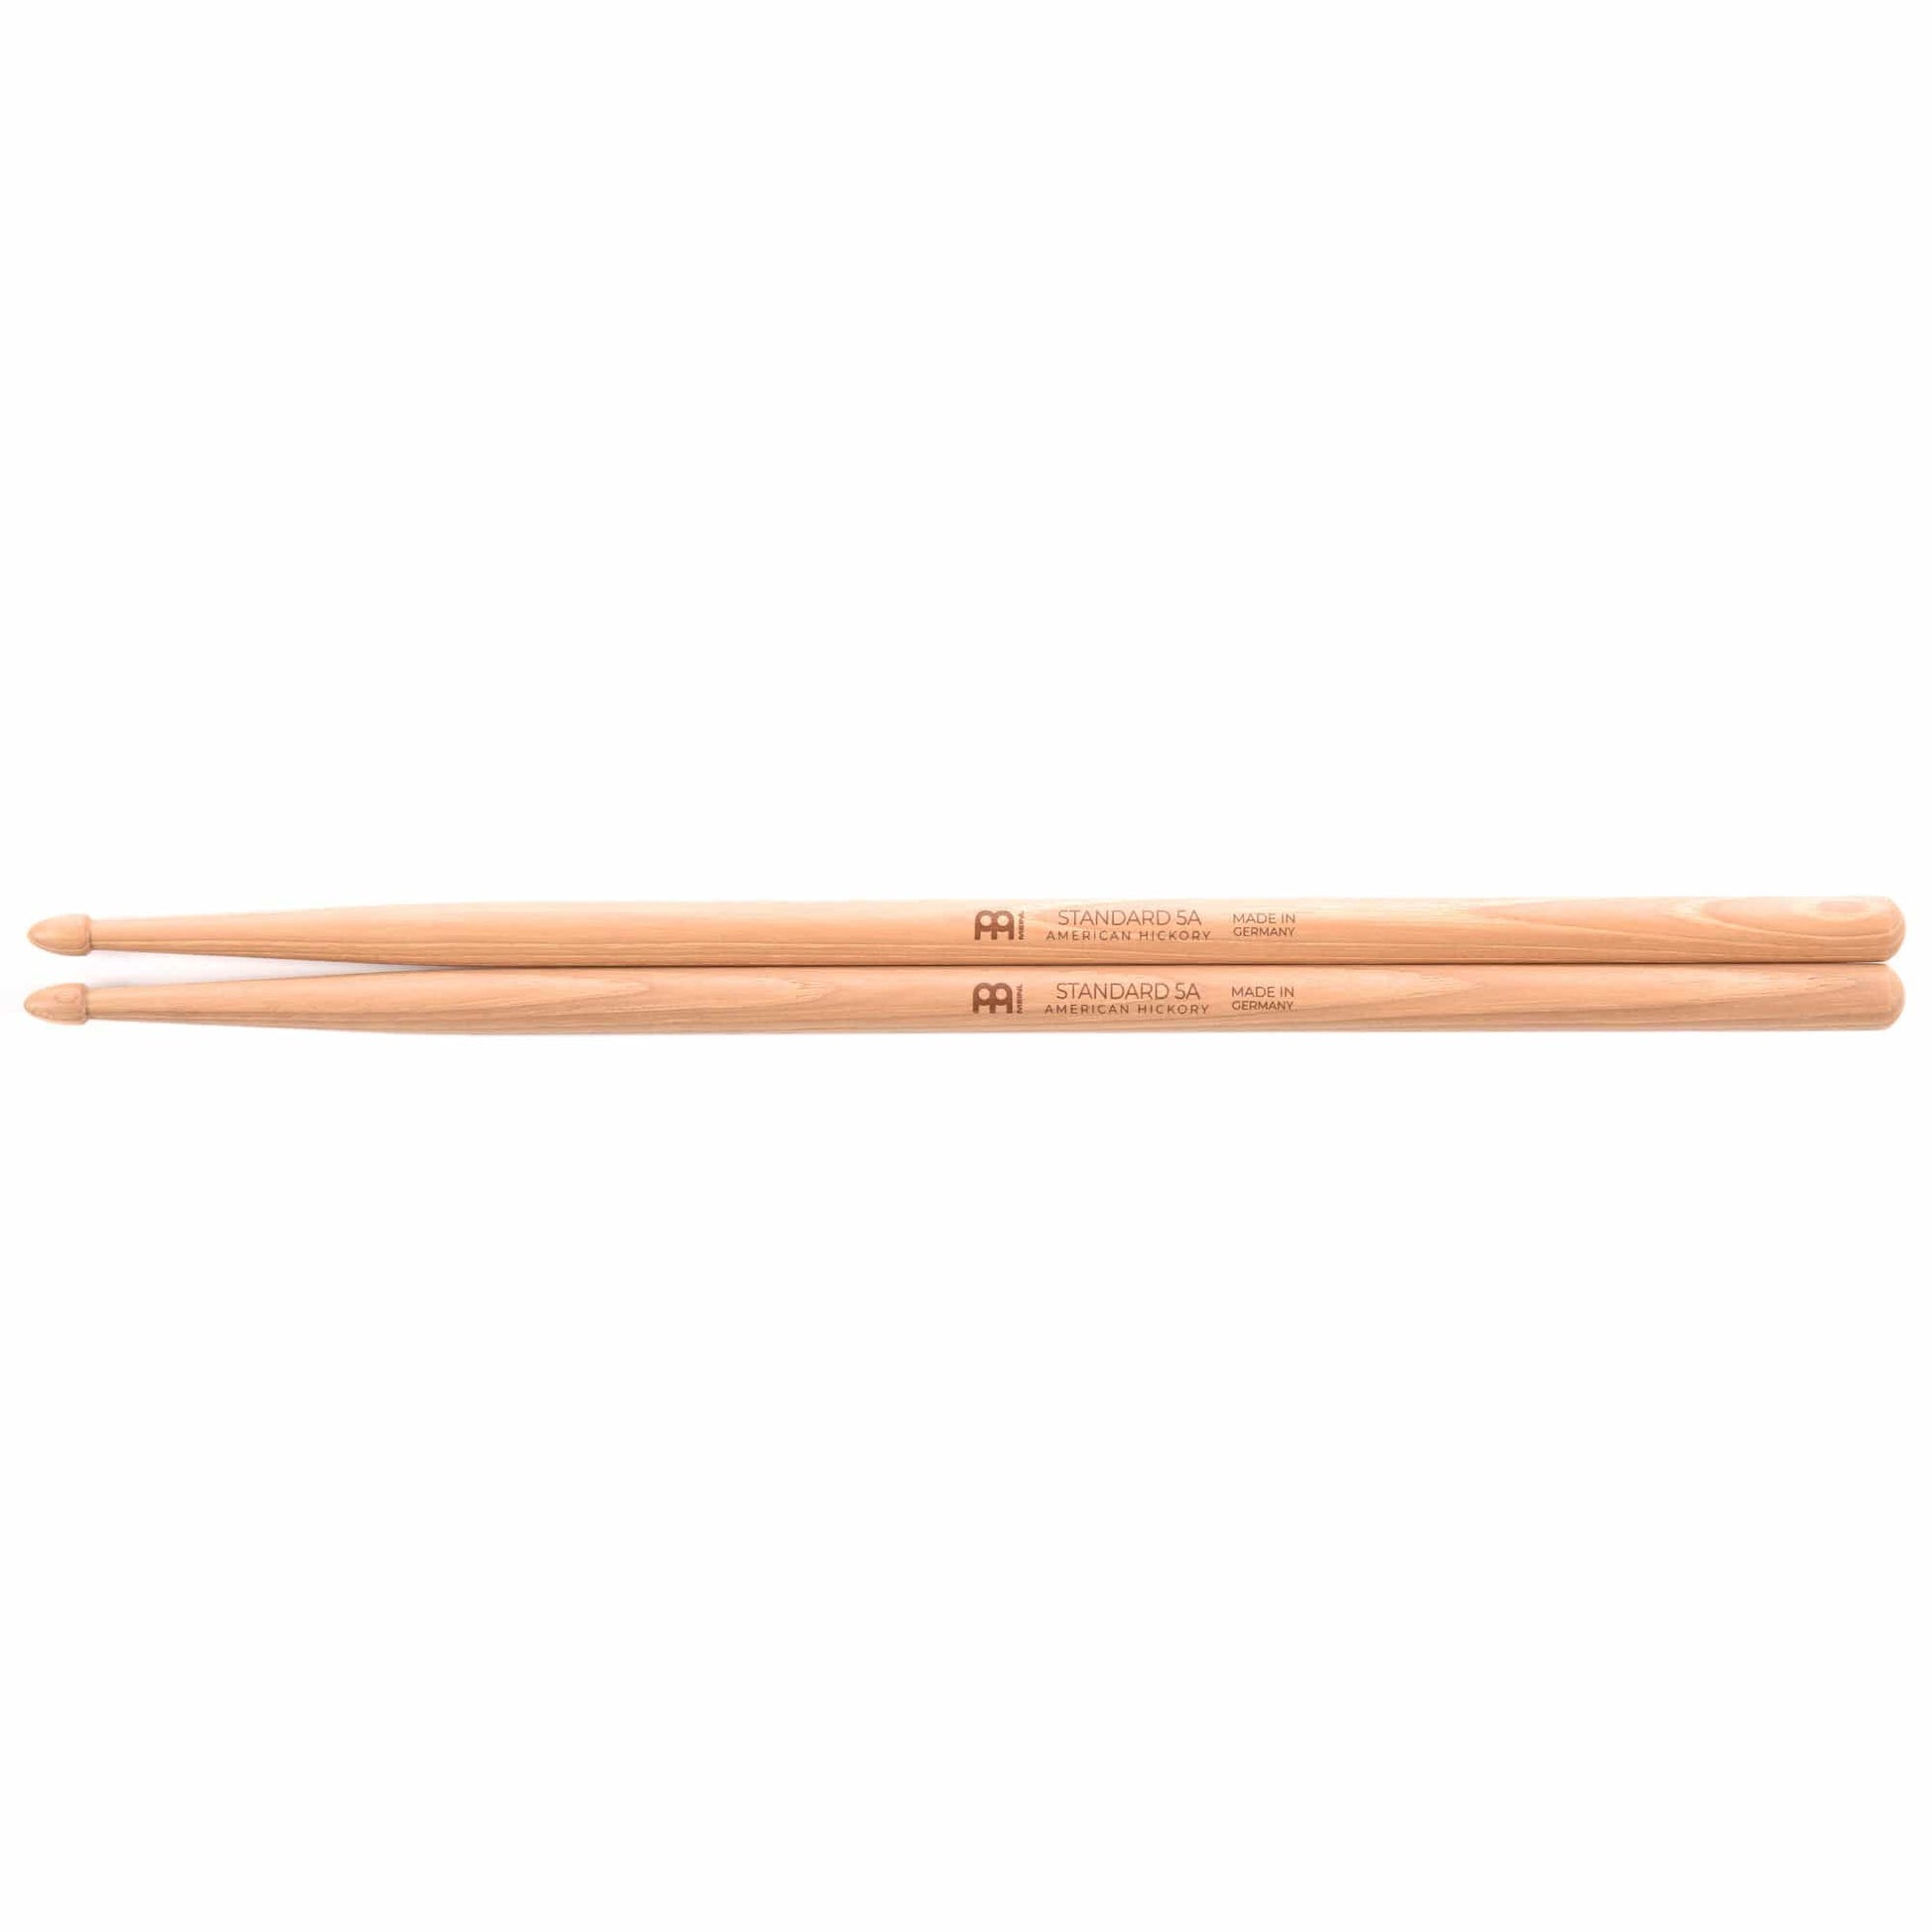 Meinl Standard 5A Wood Tip Drum Sticks Drums and Percussion / Parts and Accessories / Drum Sticks and Mallets